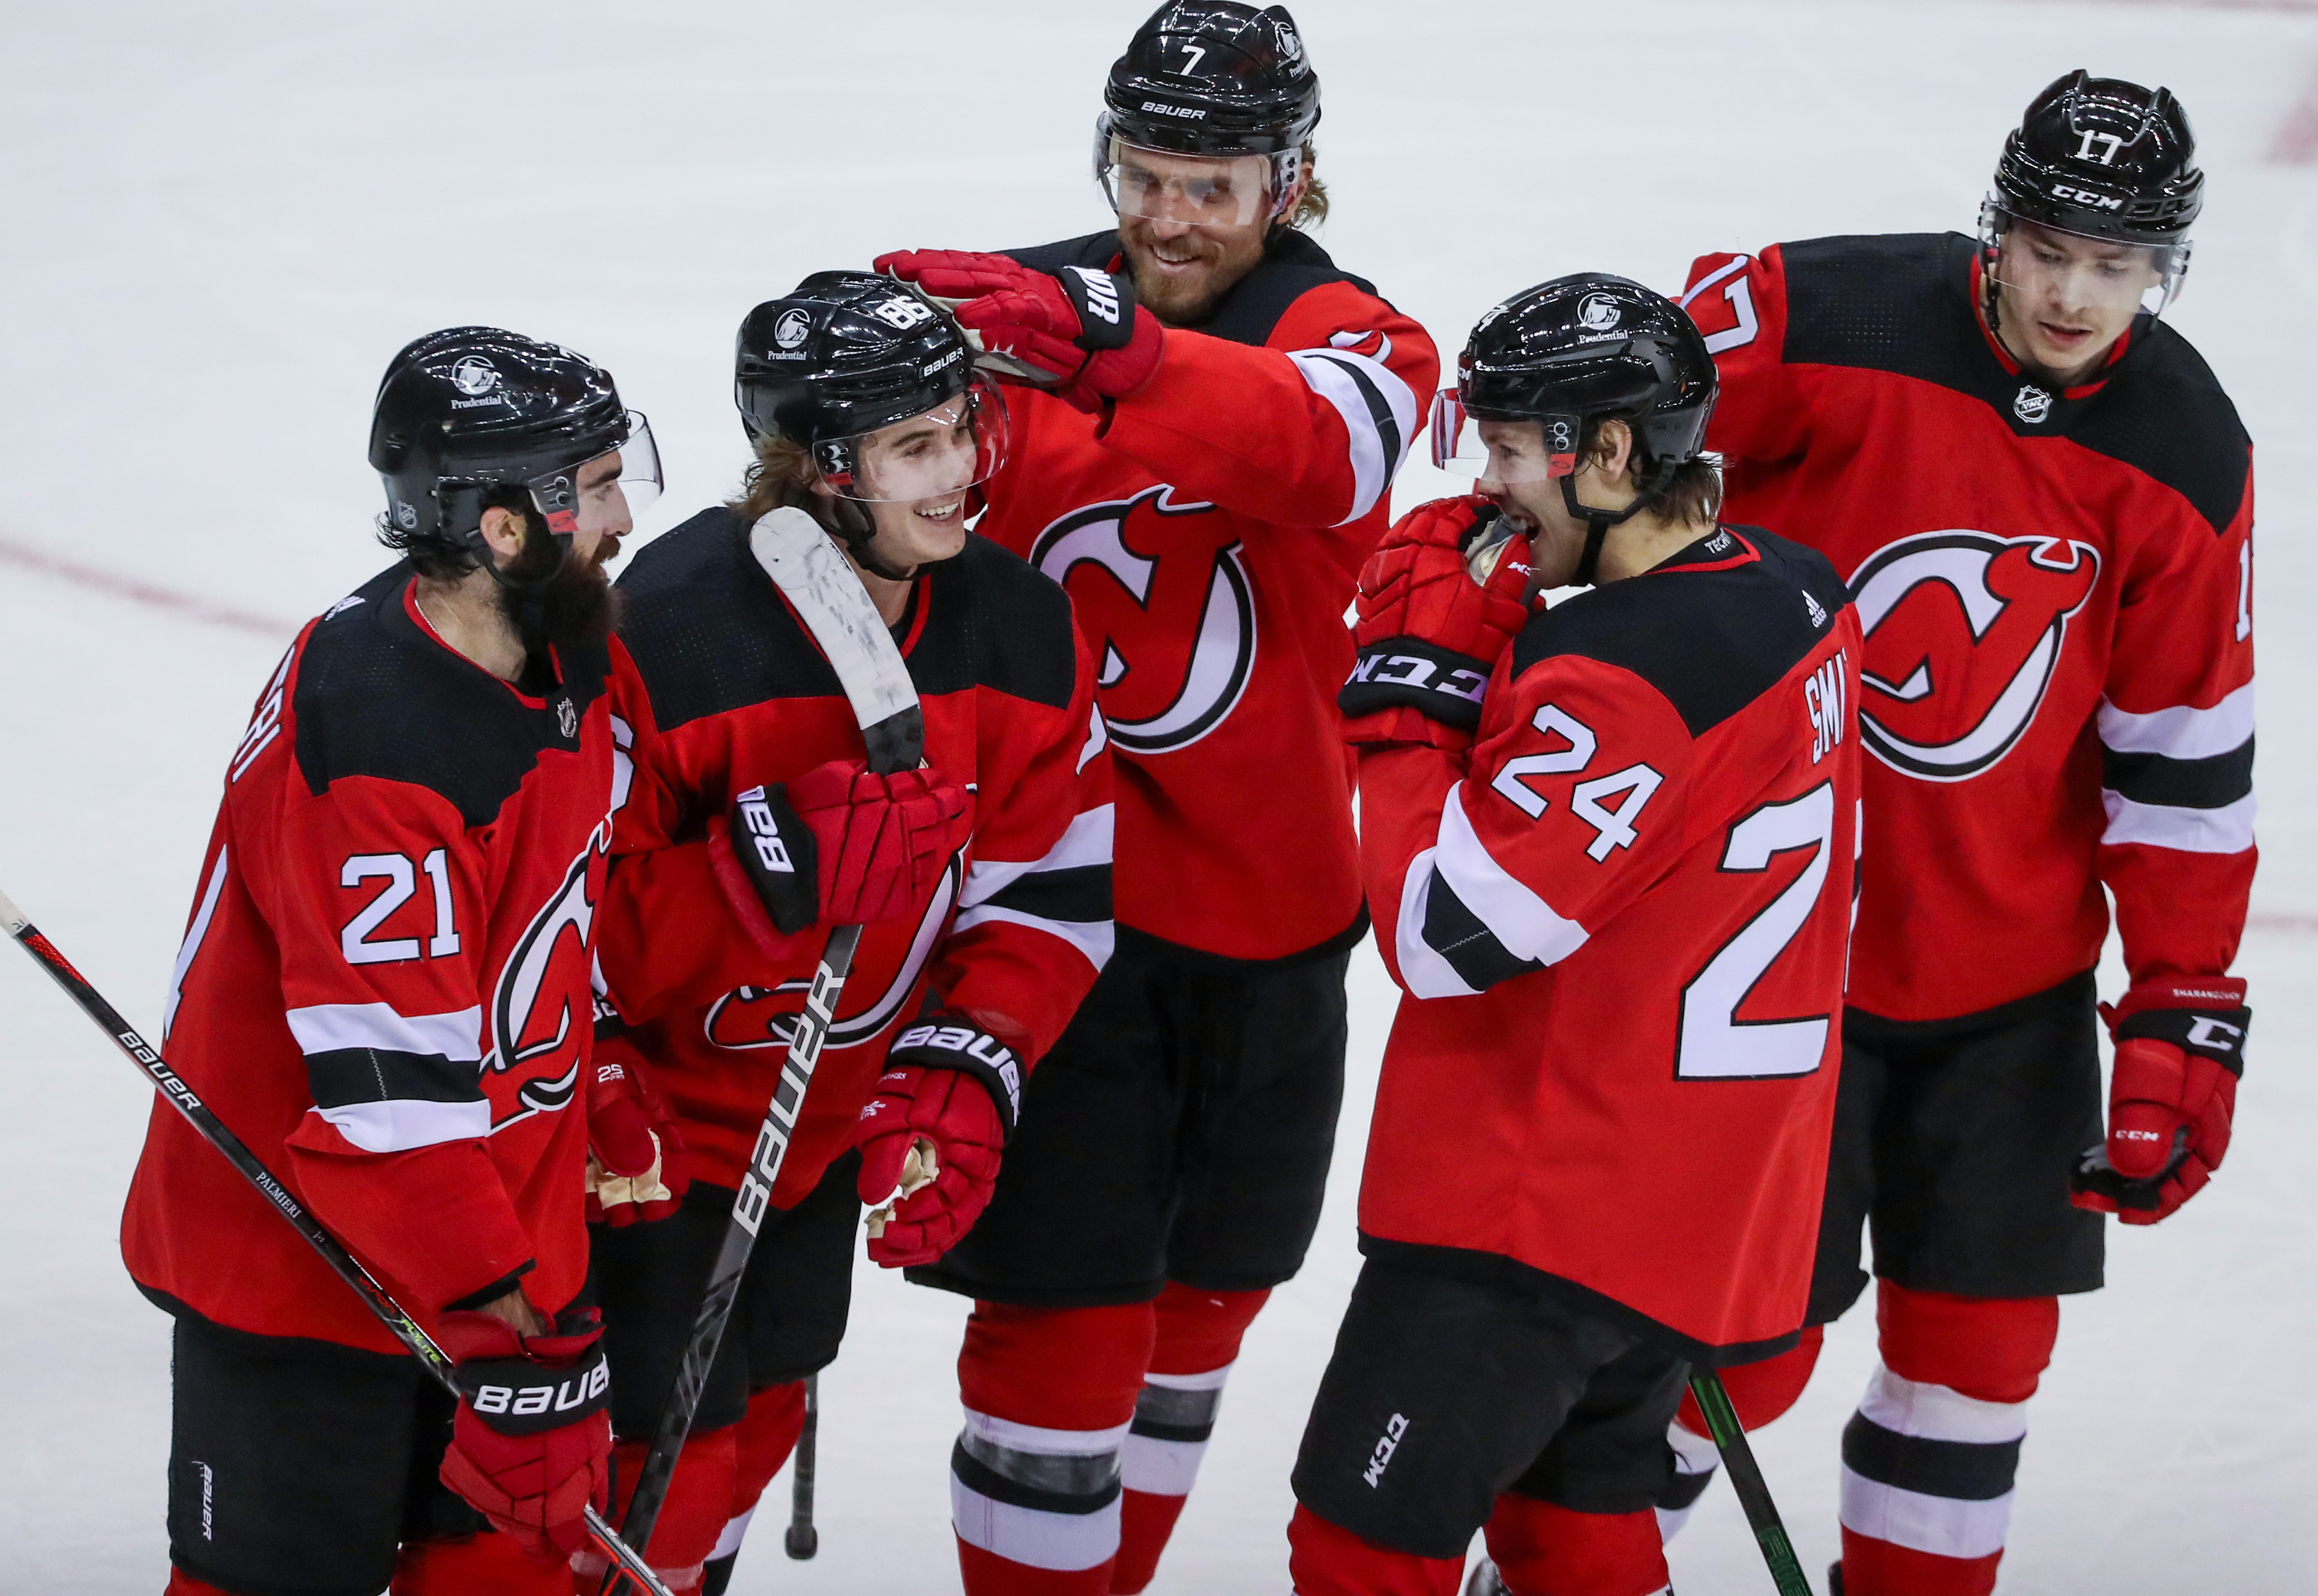 Devils get 4 national TV games, 5 on ESPN+/Hulu Here are the details